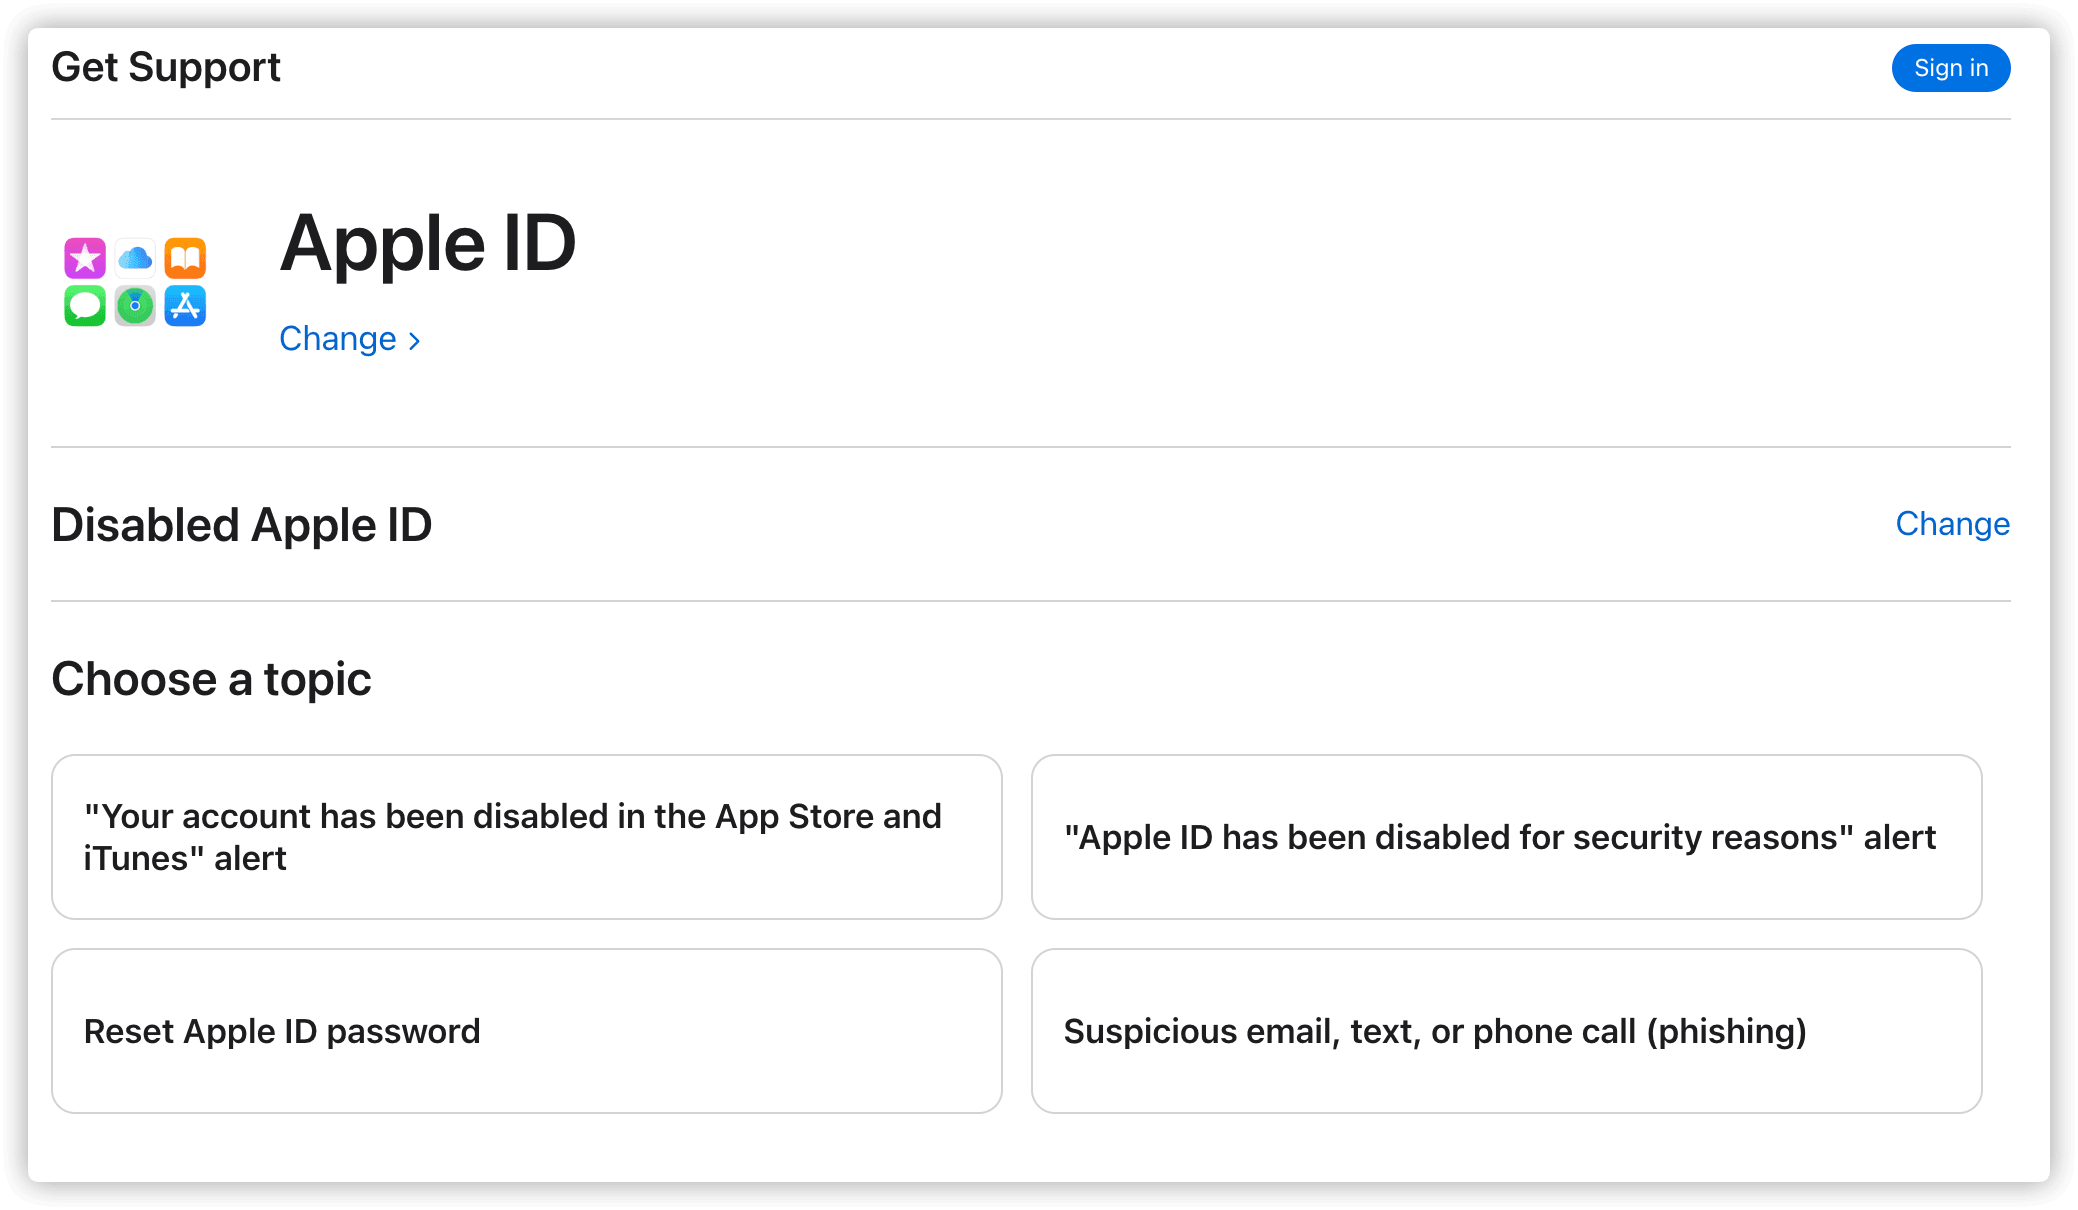 Contact Apple Support to Unlock Apple ID